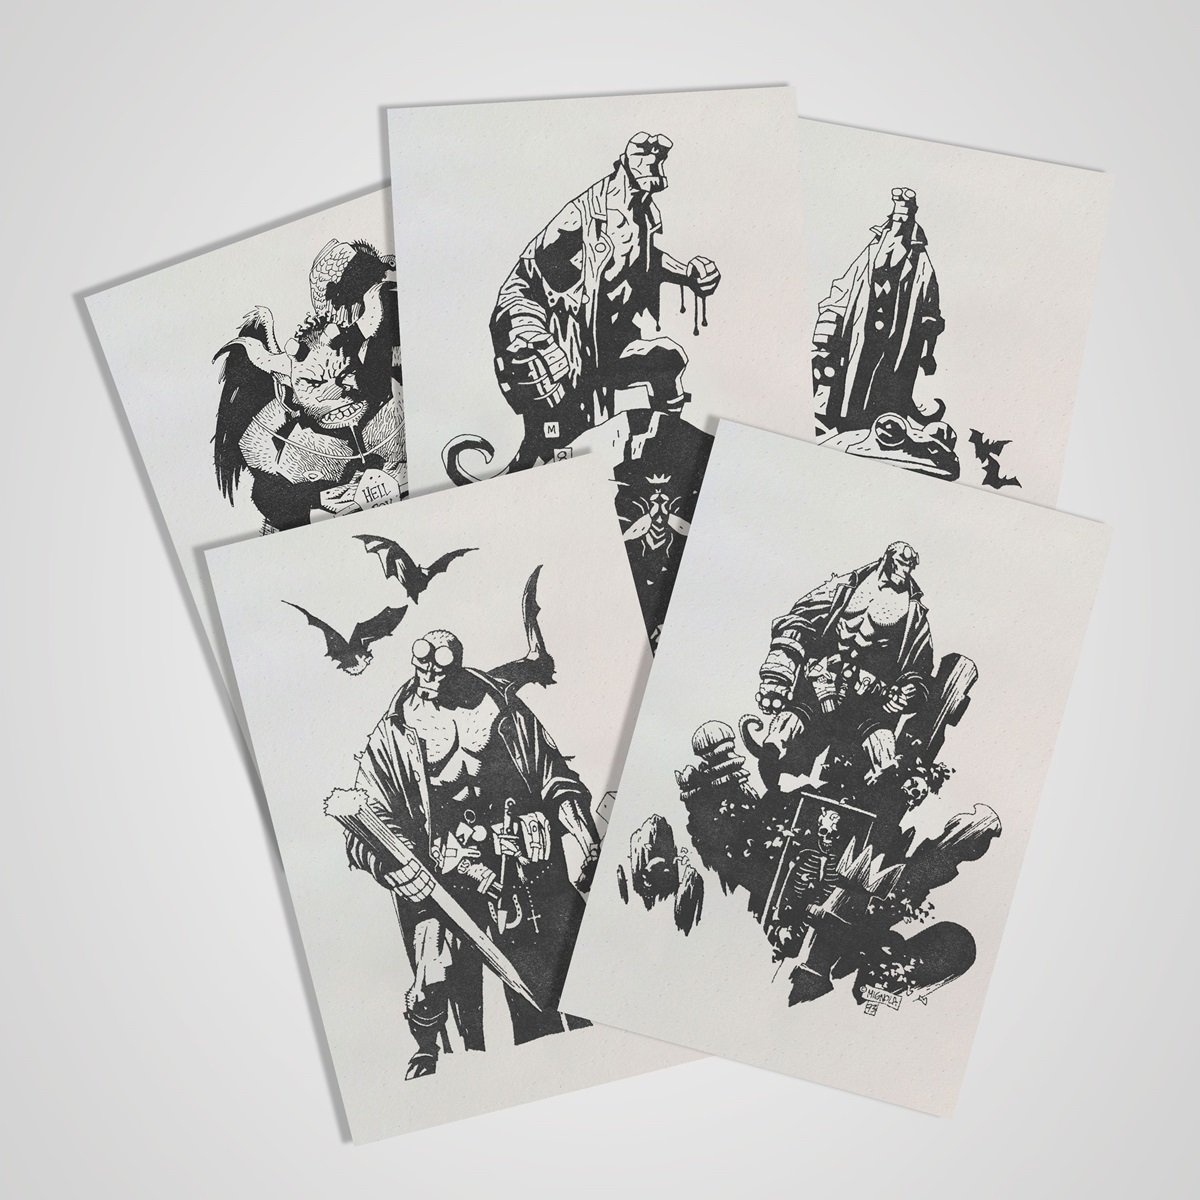 Hellboy Letterpress images from artist and Hellboy creator Mike Mignola.